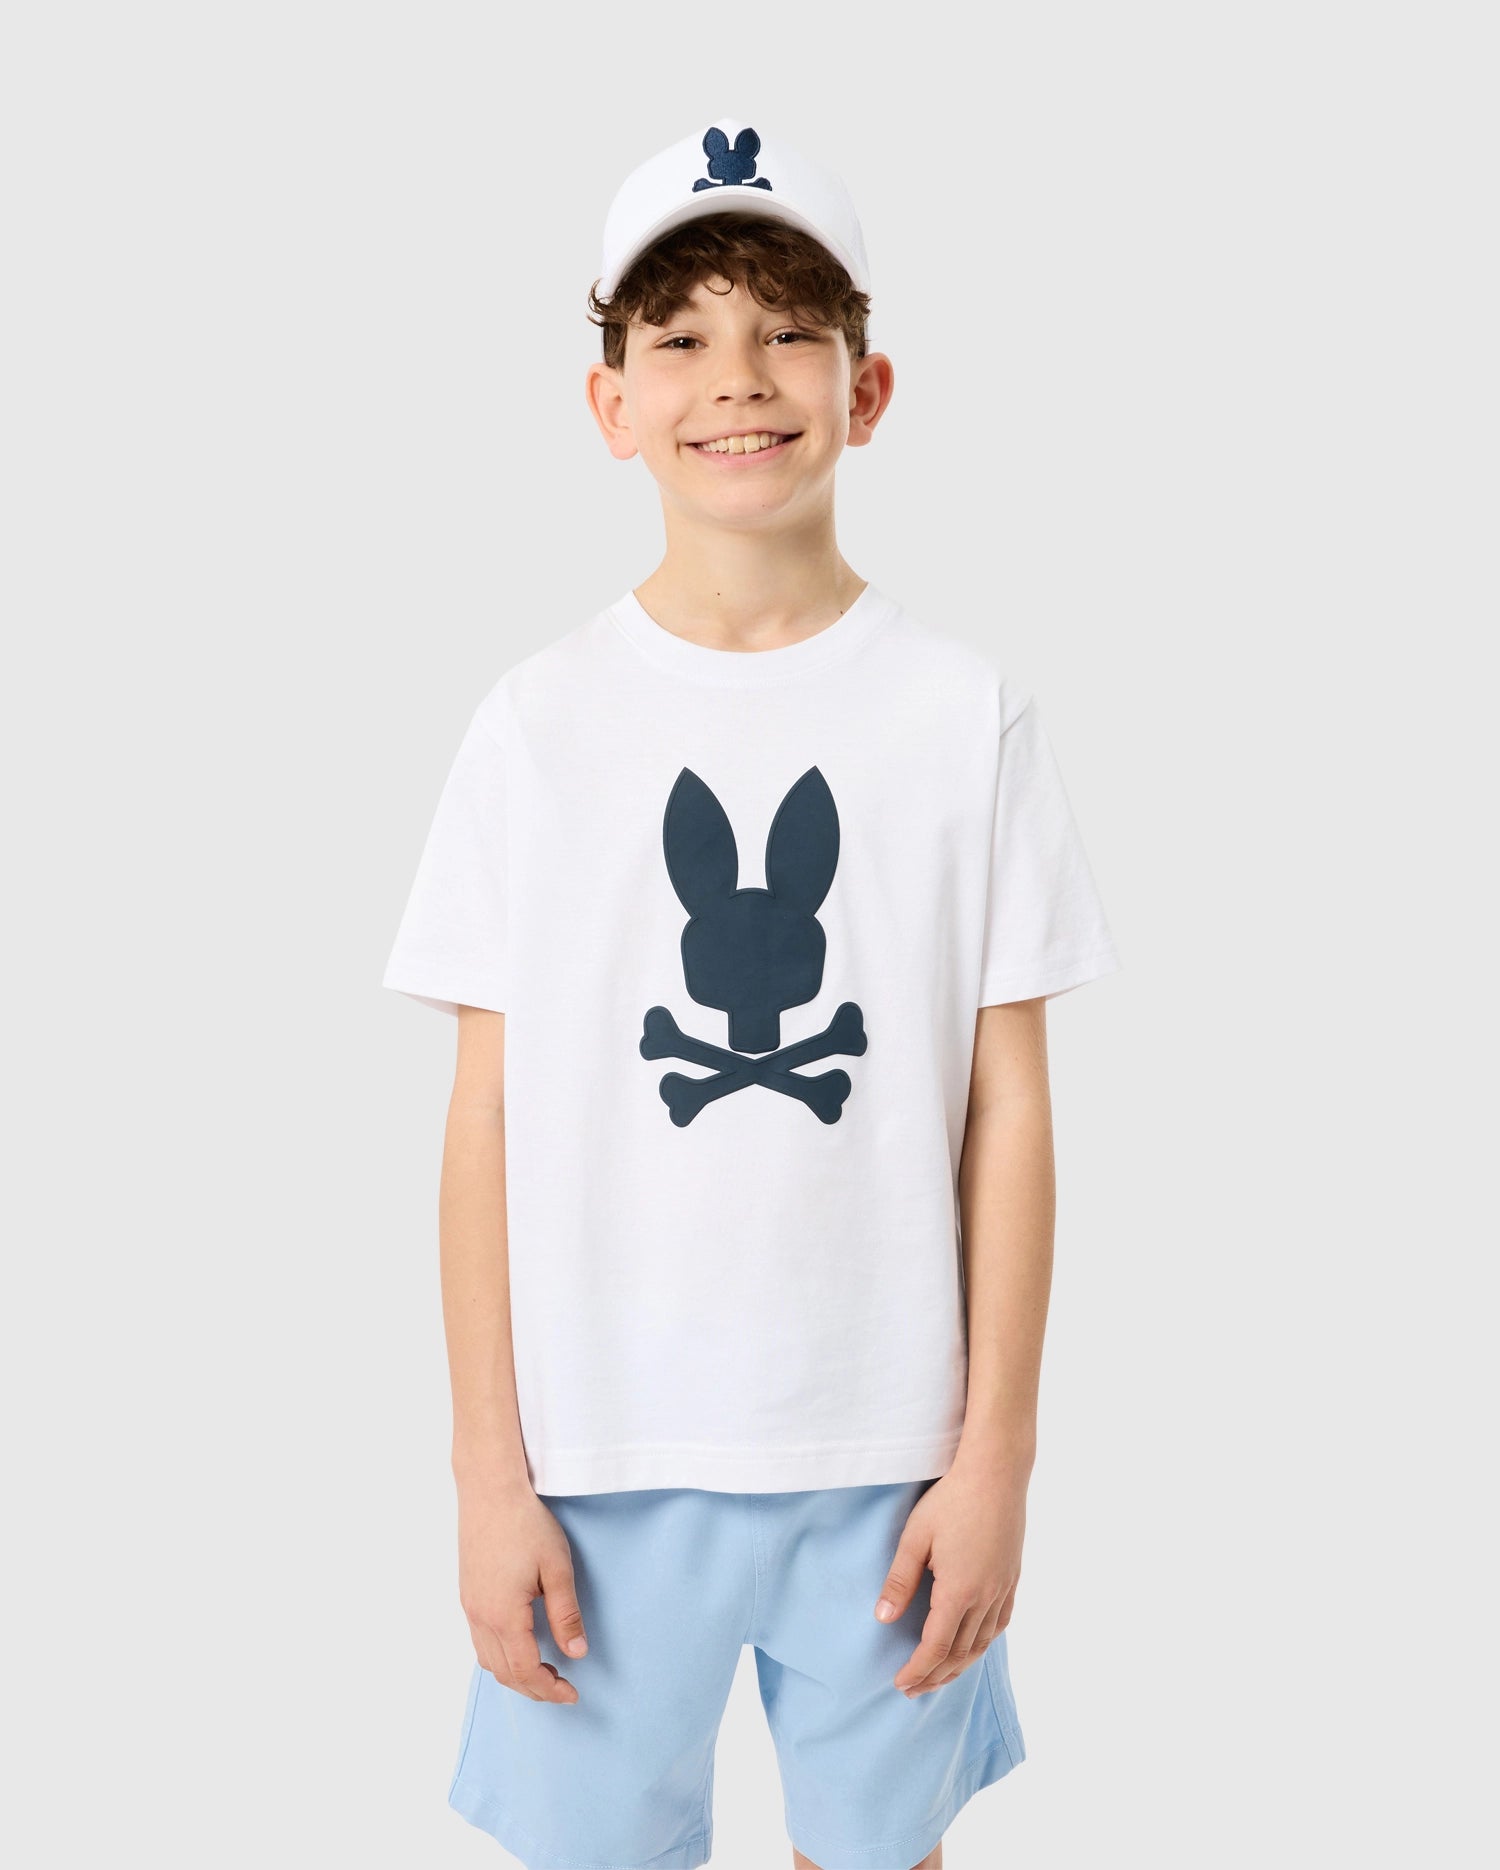 A smiling boy wearing a white KIDS HOUSTON GRAPHIC TEE by Psycho Bunny, featuring a black bunny and crossbones design, paired with light blue shorts and a white cap with a bunny logo, standing against a grey background.